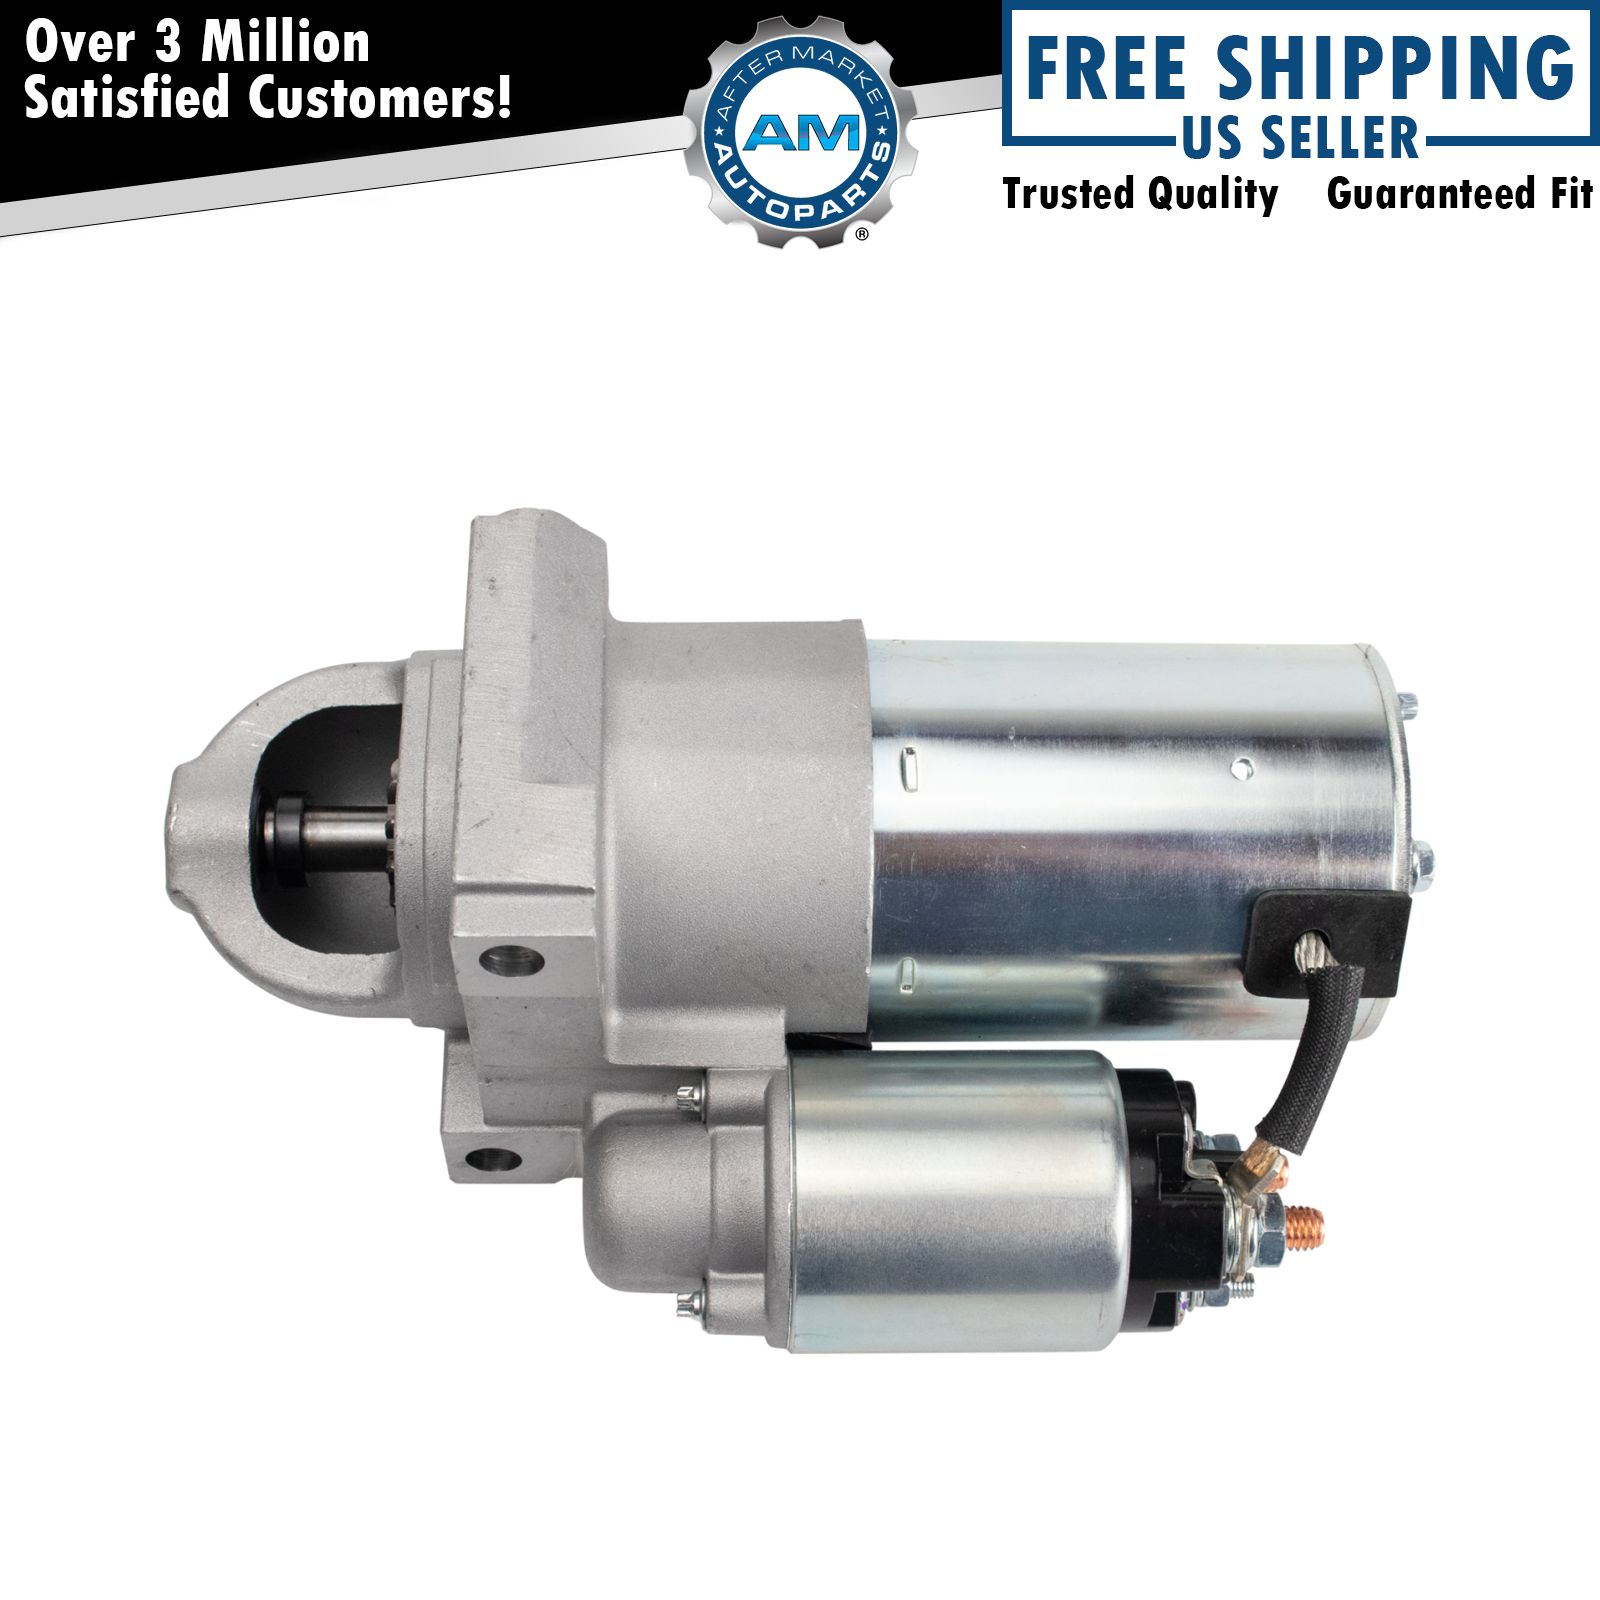 New Replacement Starter Motor for GMC Chevrolet Pickup Truck SUV 6.0L 6.2L